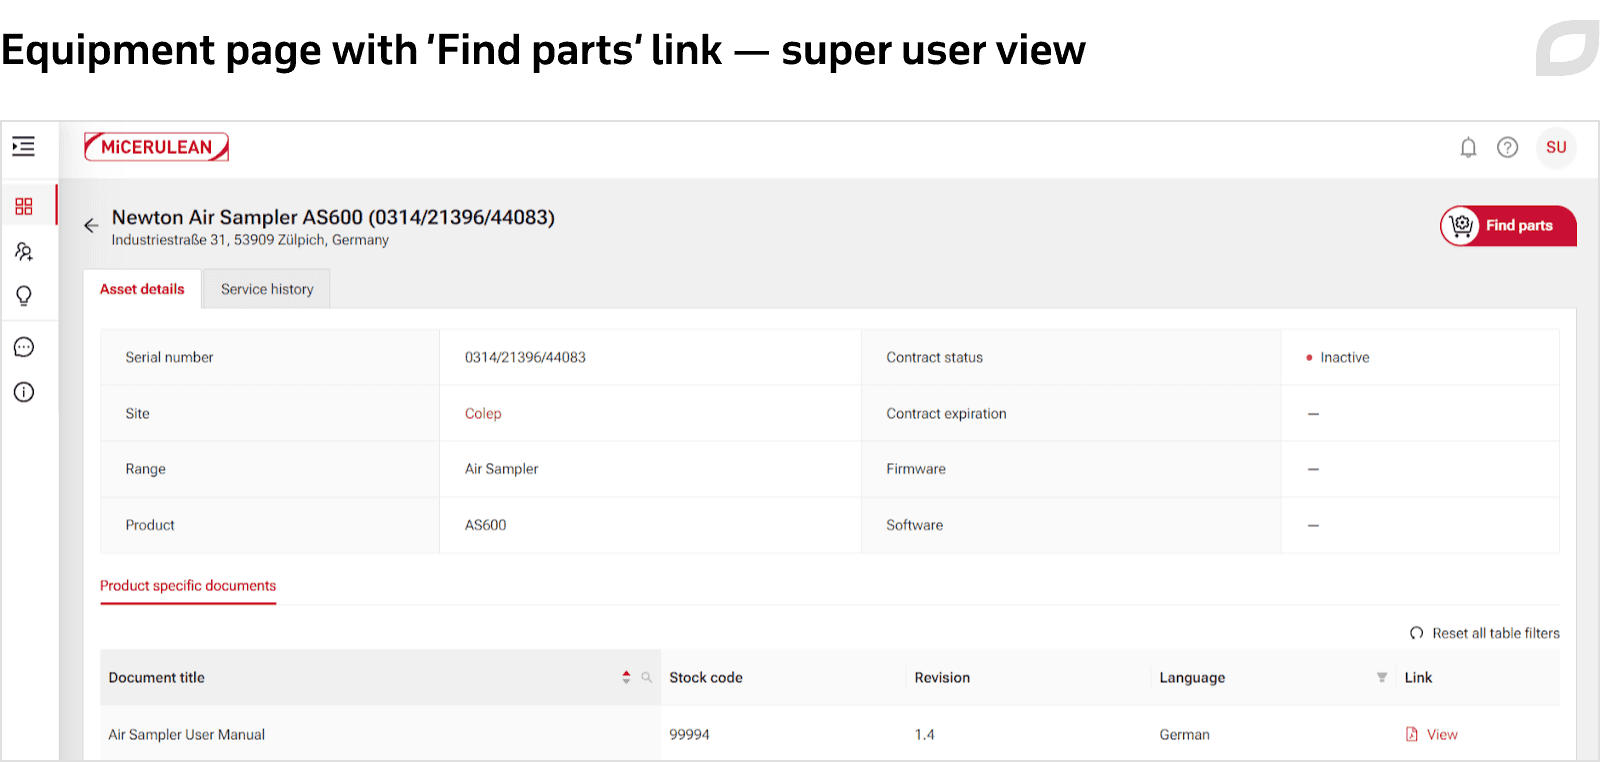 Equipment page with ‘Find parts’ link - super user view